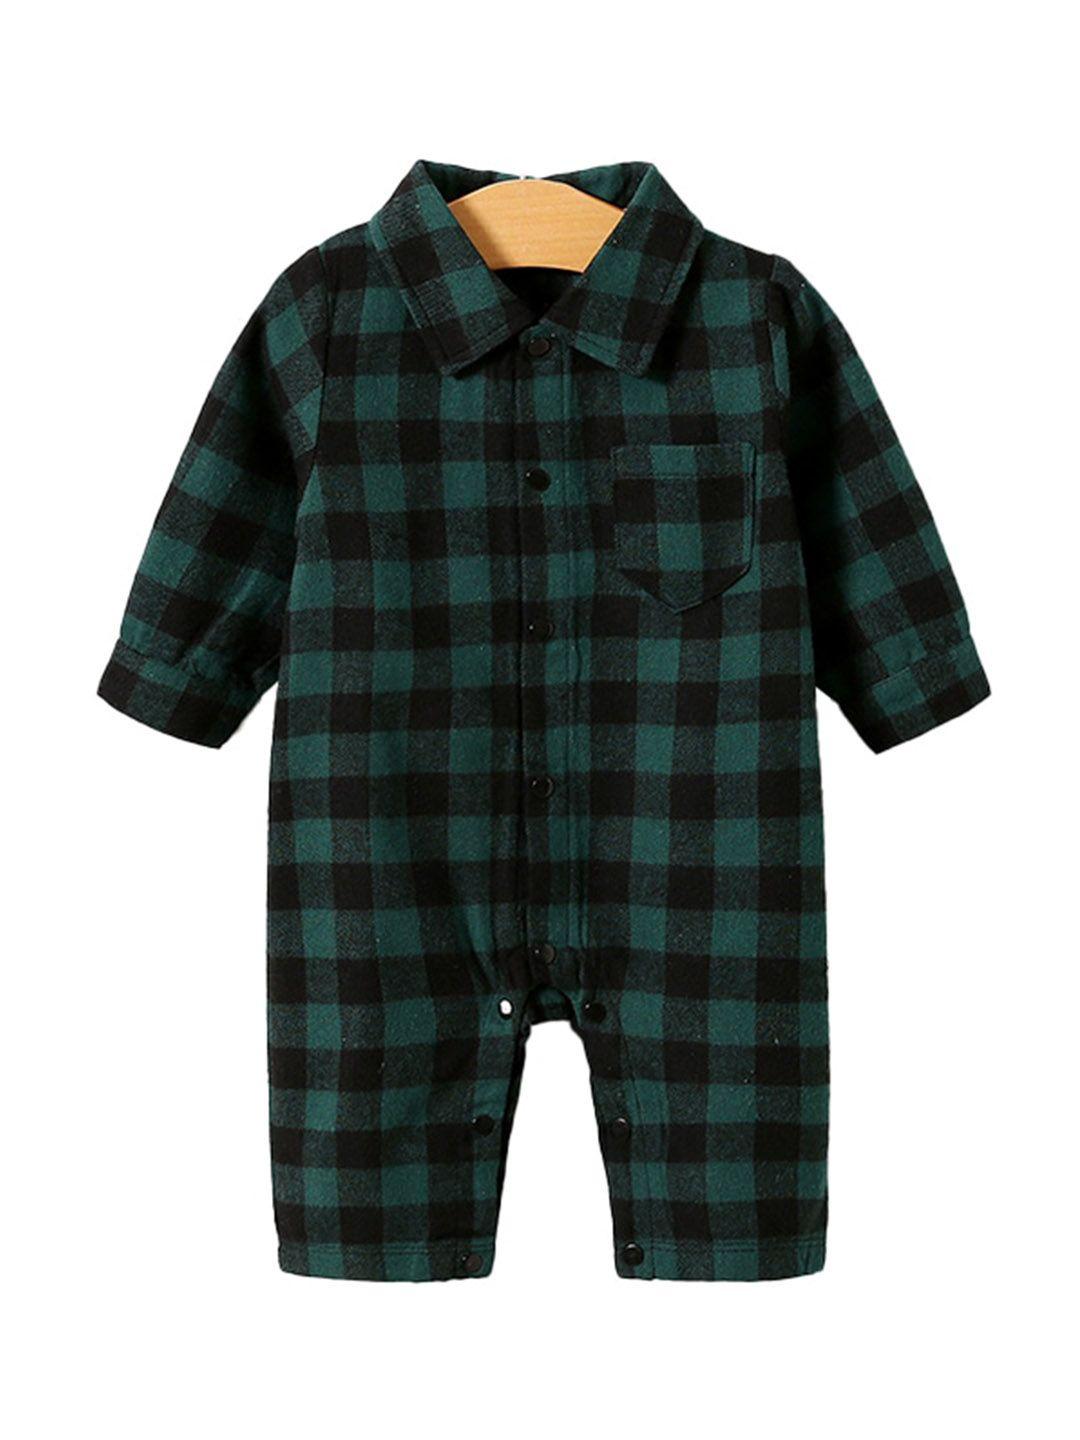 stylecast-infant-boys-green-&-black-checked-cotton-rompers